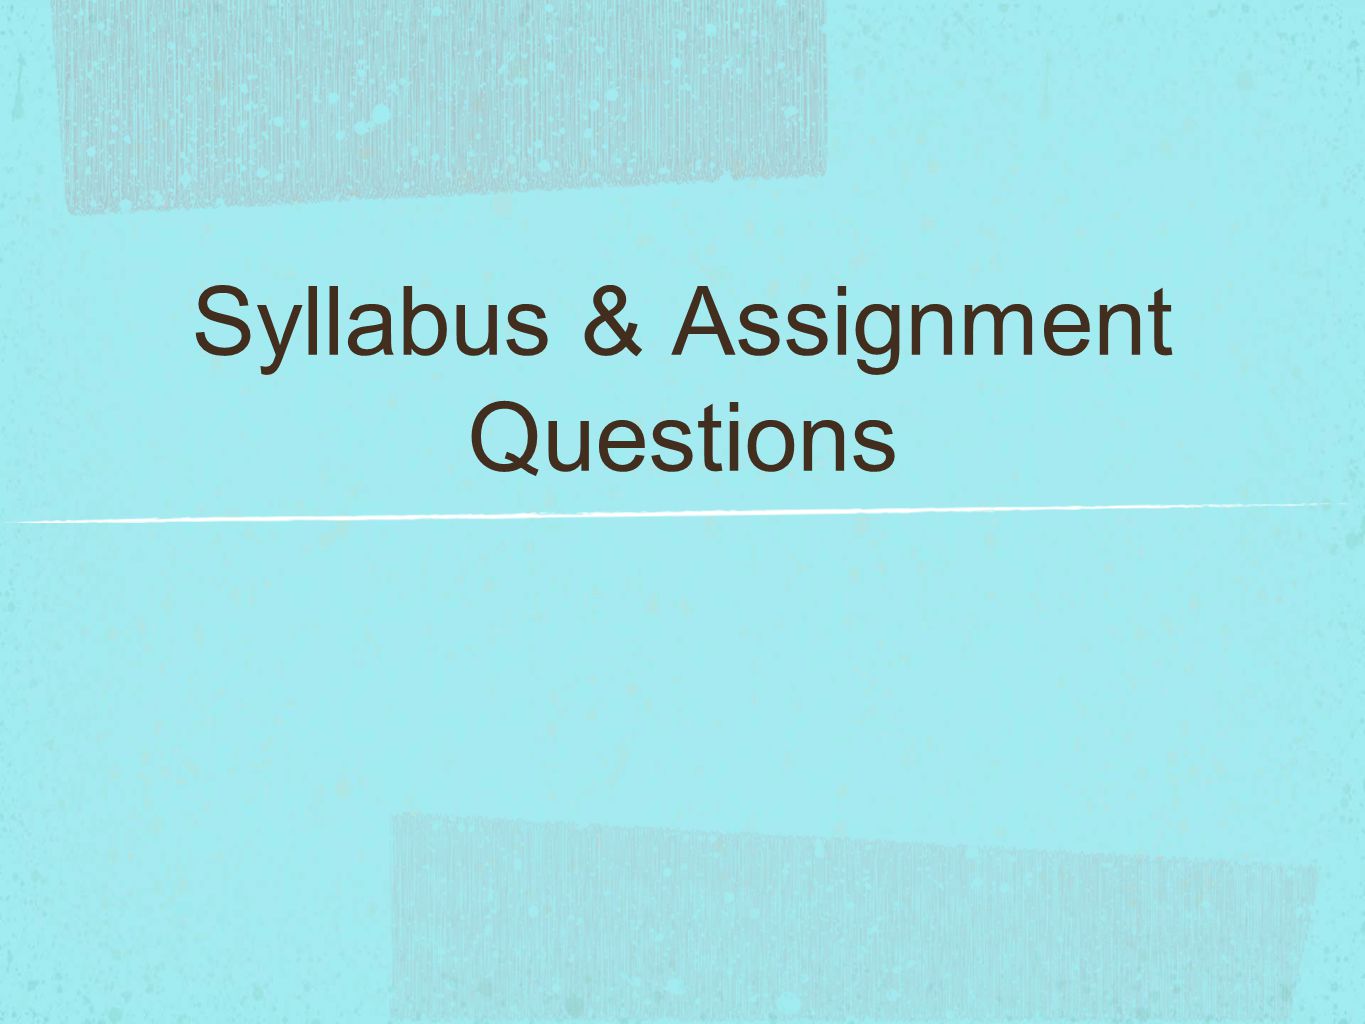 Syllabus & Assignment Questions